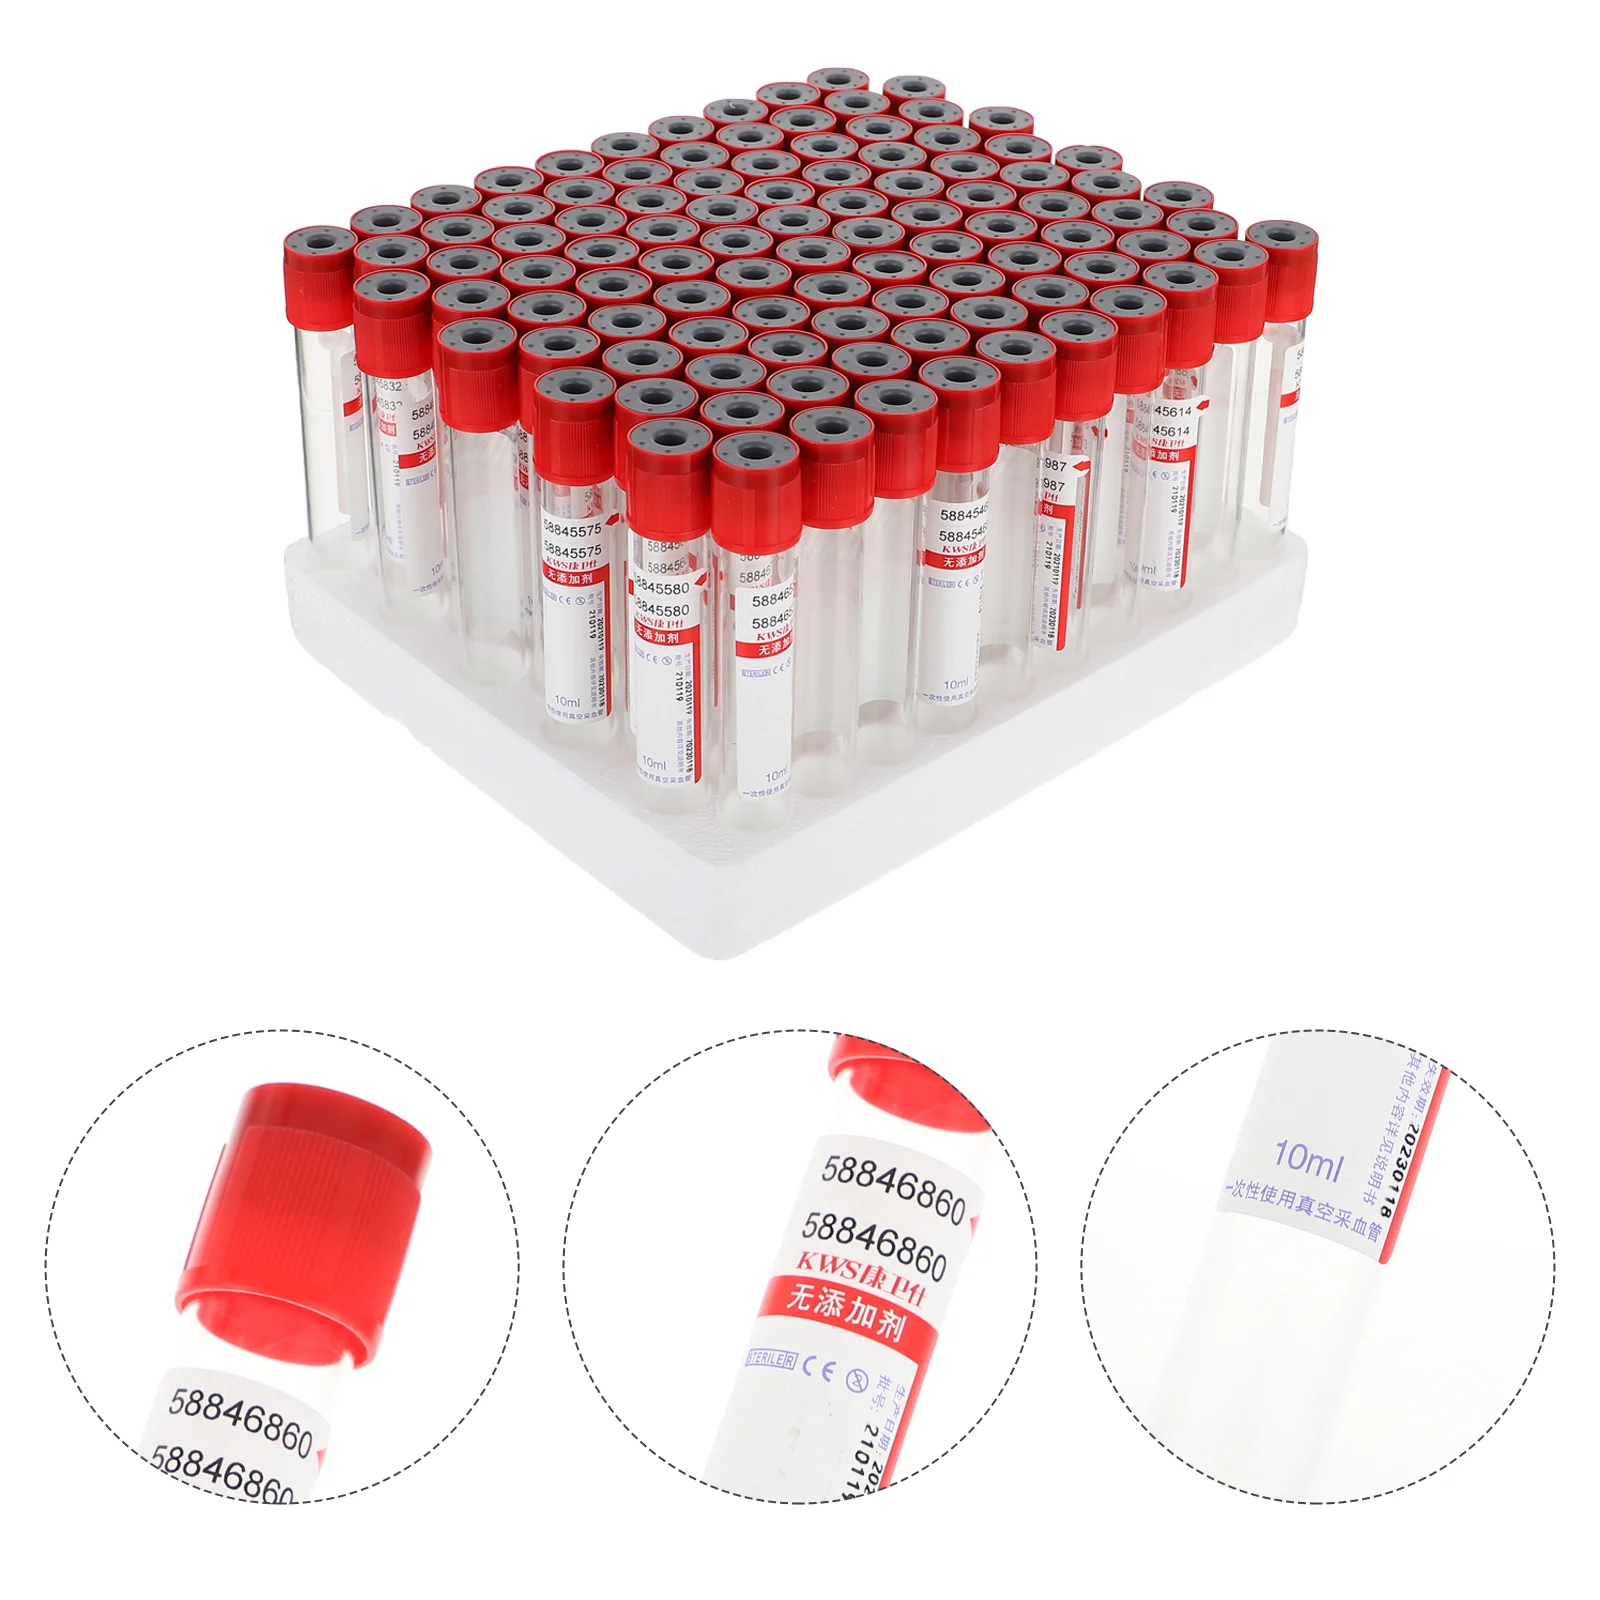 

100 Pcs 10ml Blood Collection Tube Disposable Collector Vacuum Tubes Test with Lids Glass Collecting